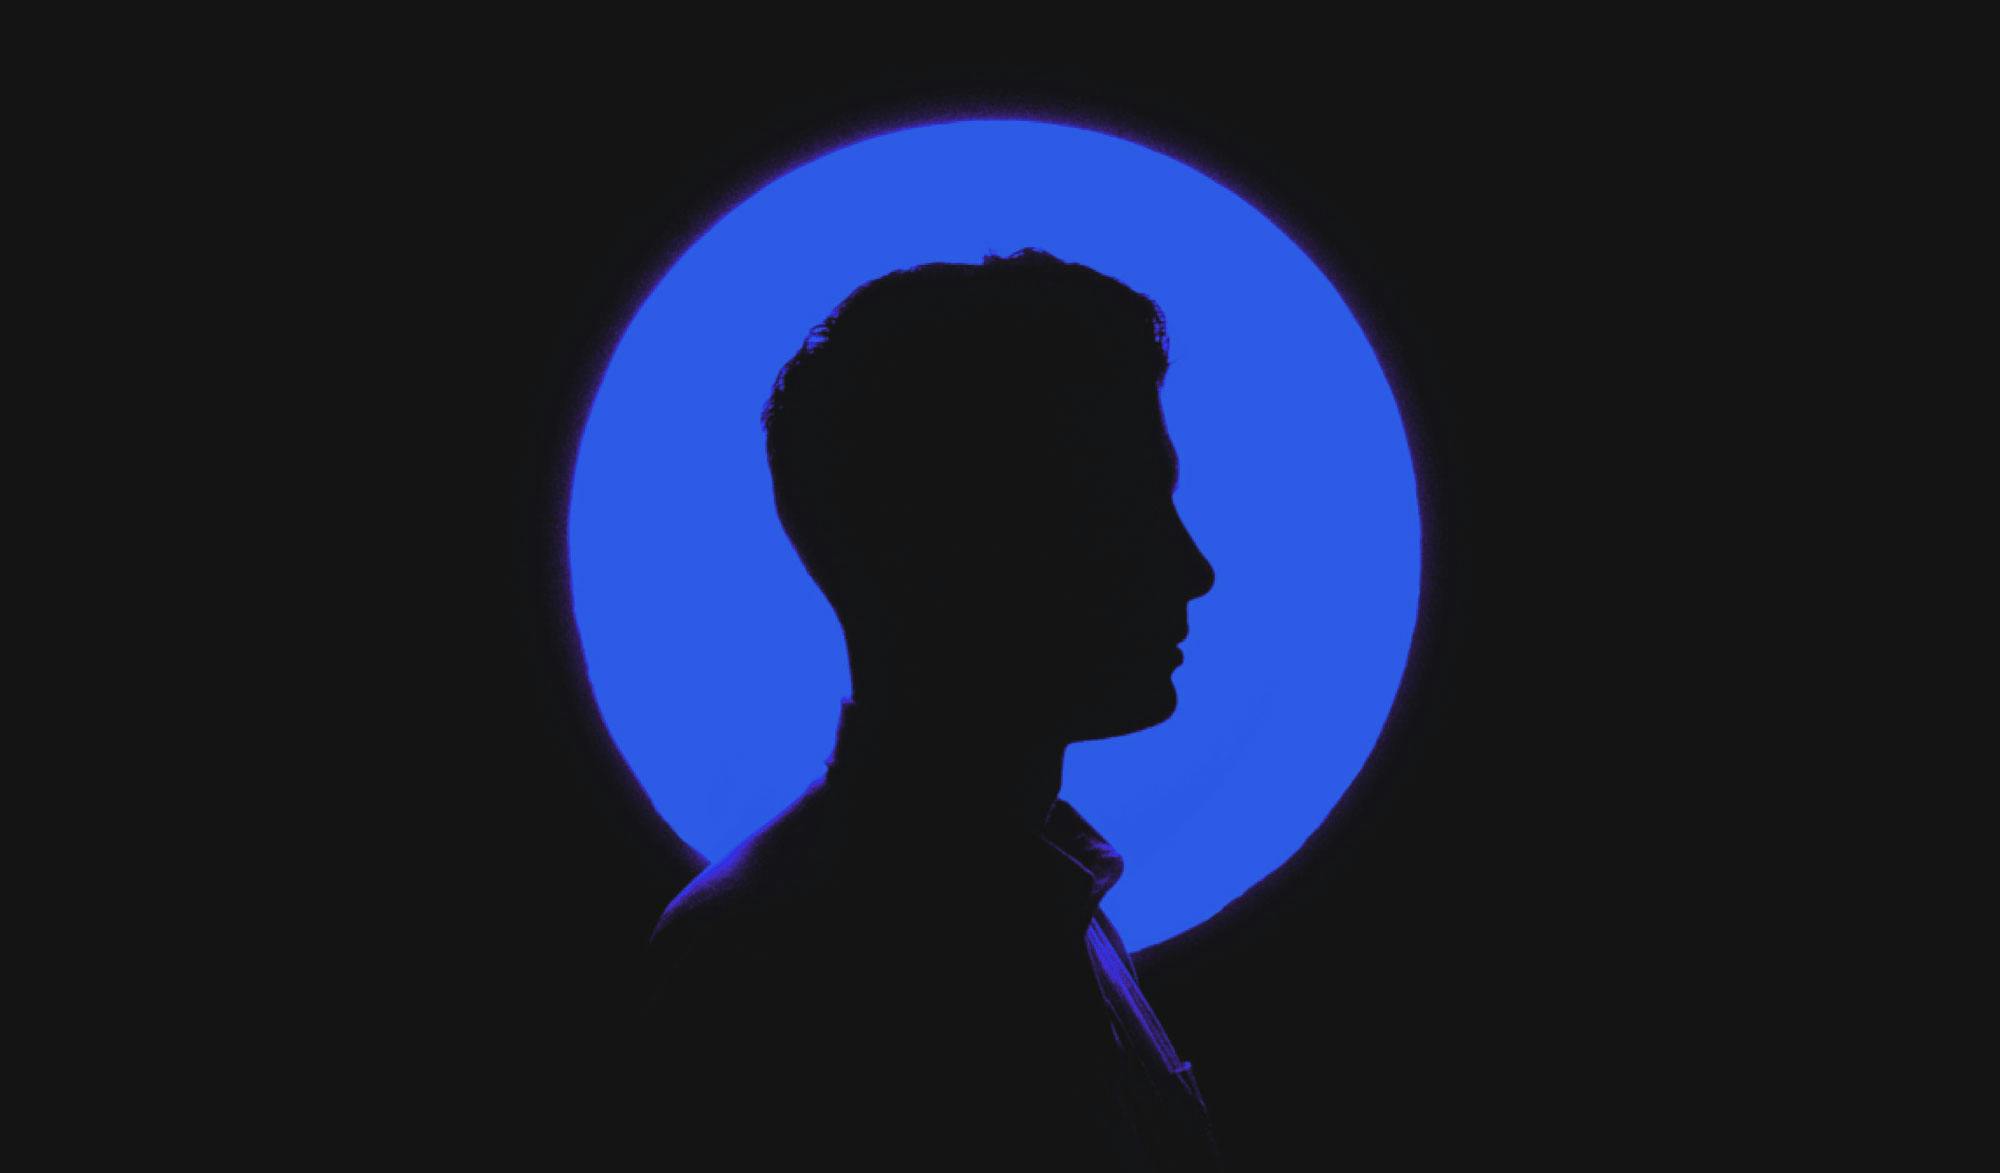 Silhouette of a mans profile behind a blue circle light on a black background.